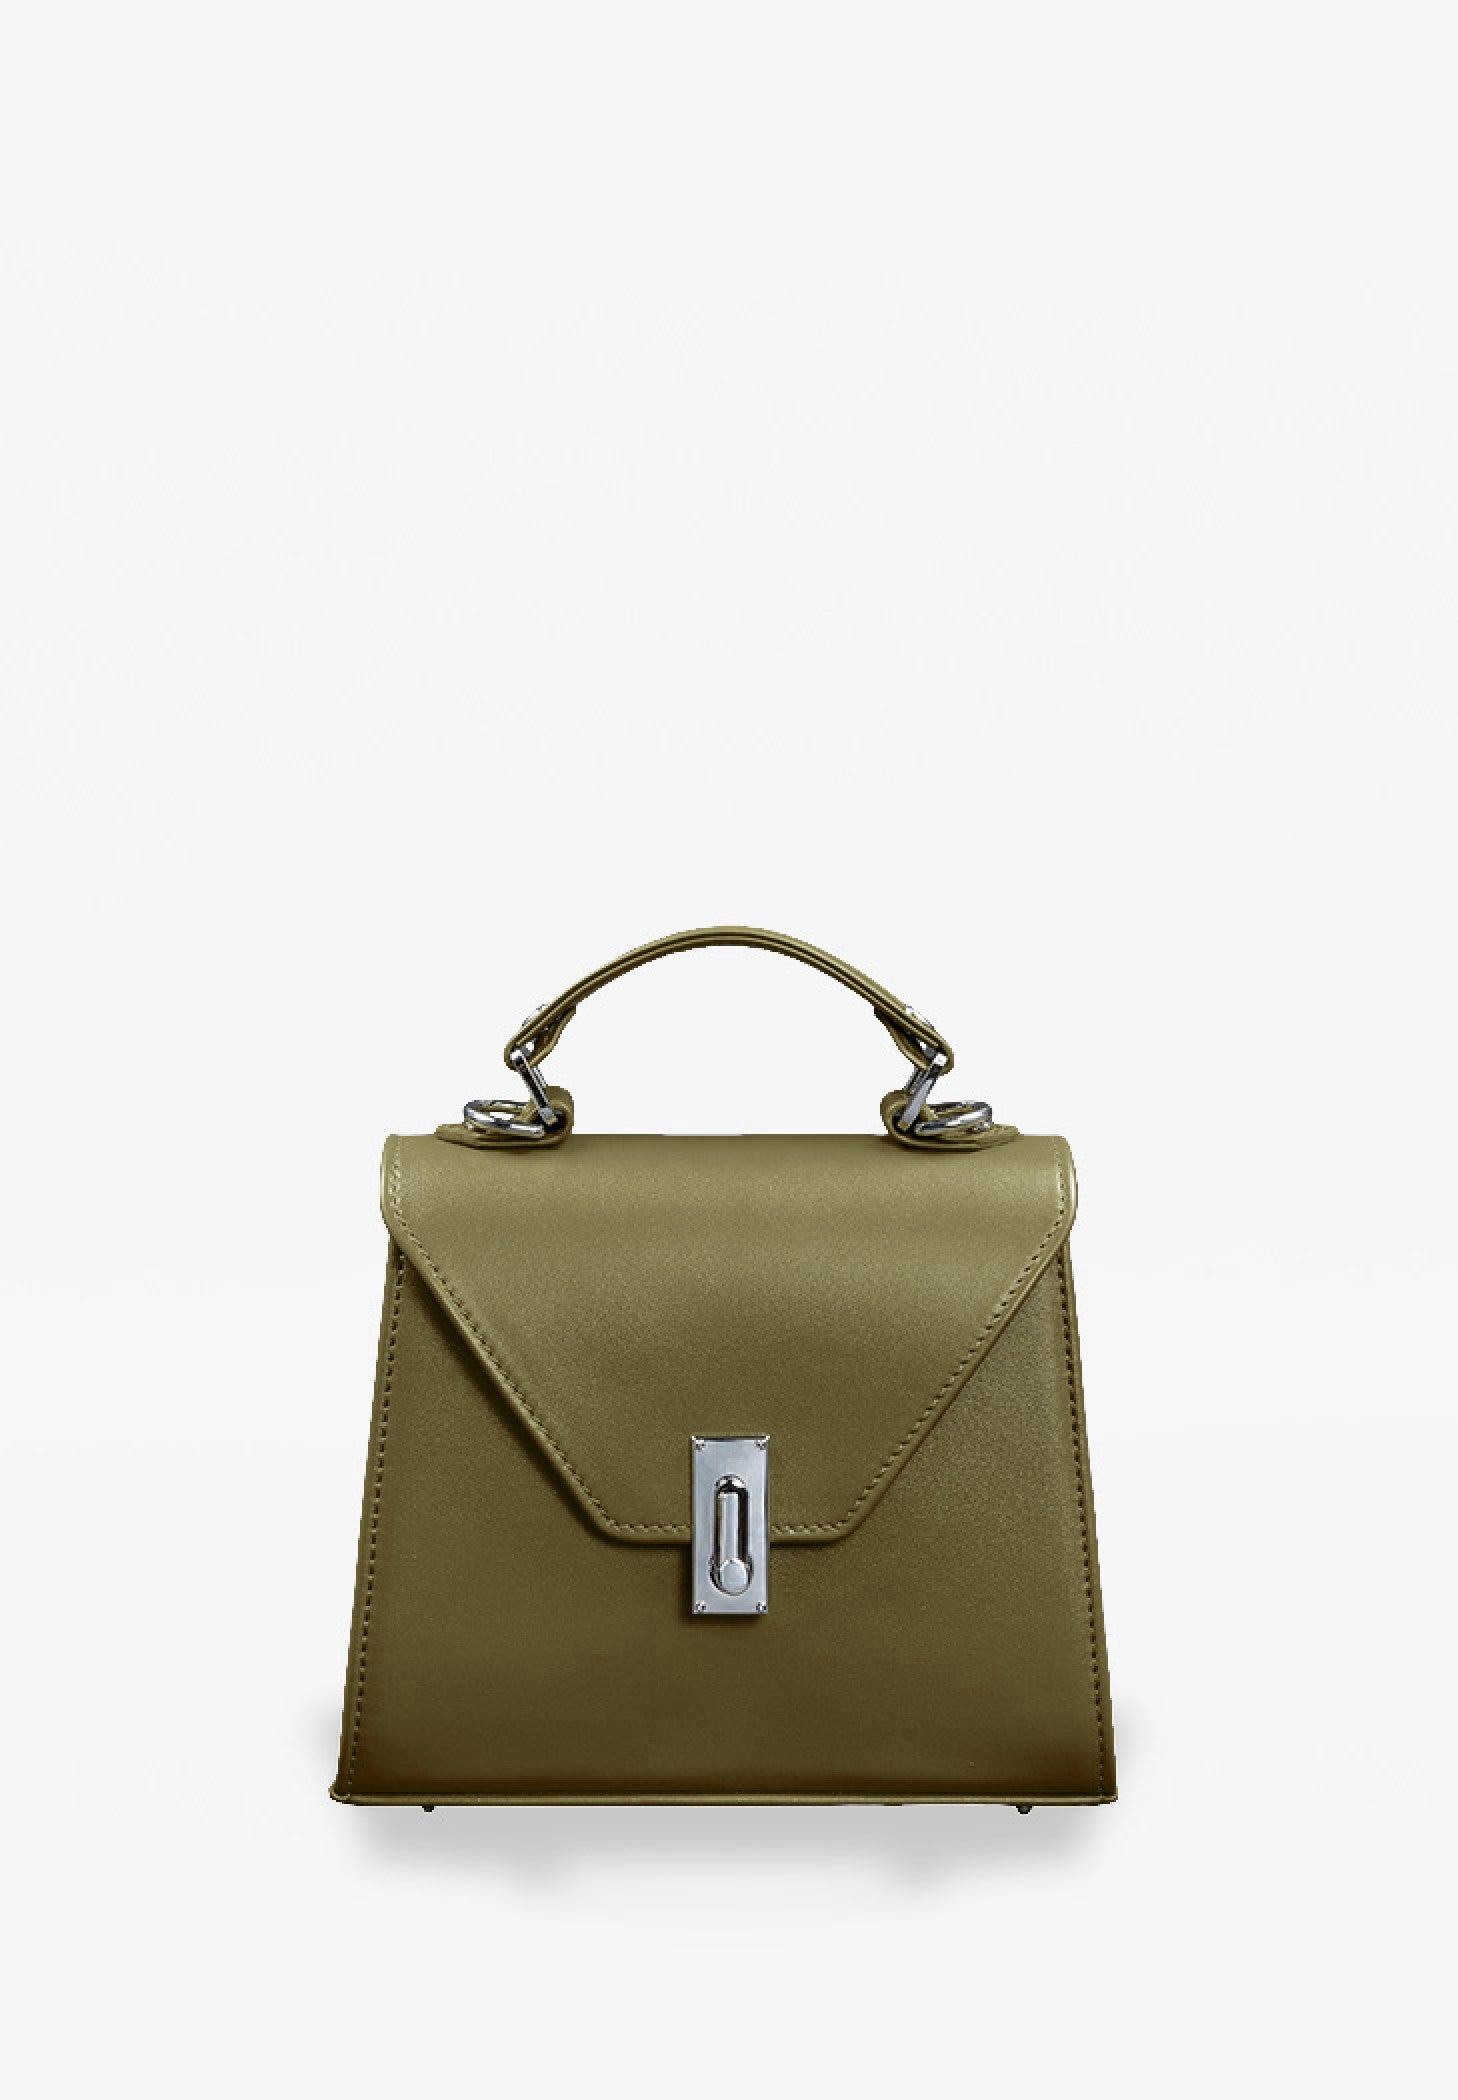 green olive leather handbag for woman